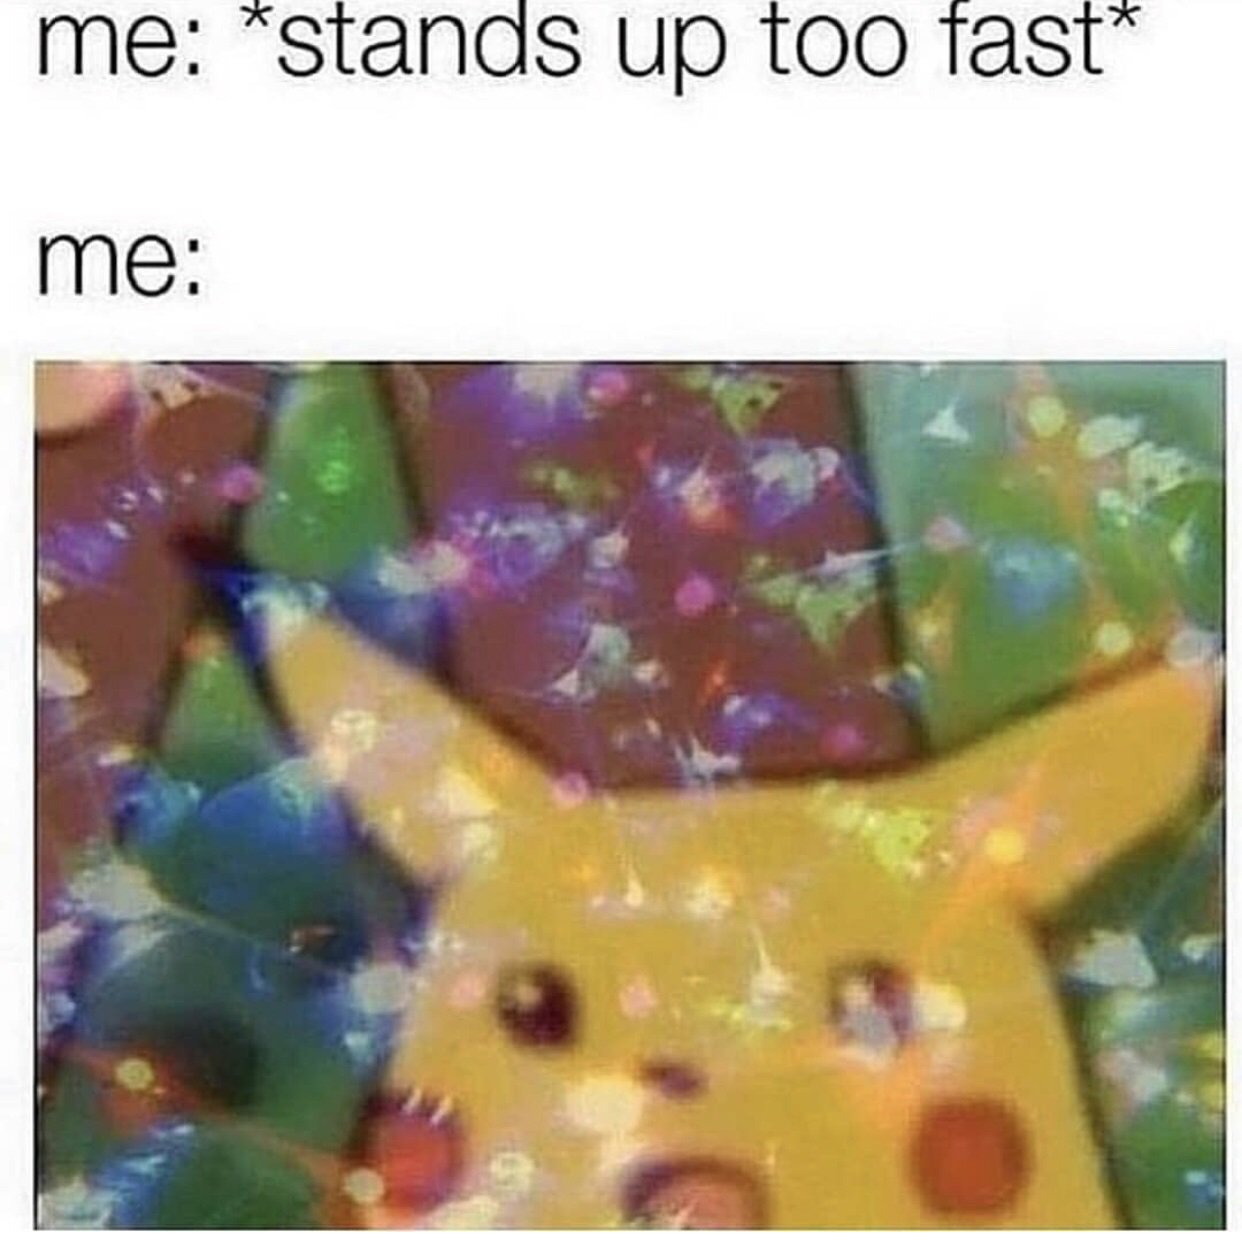 hypotension meme - me stands up too fast me